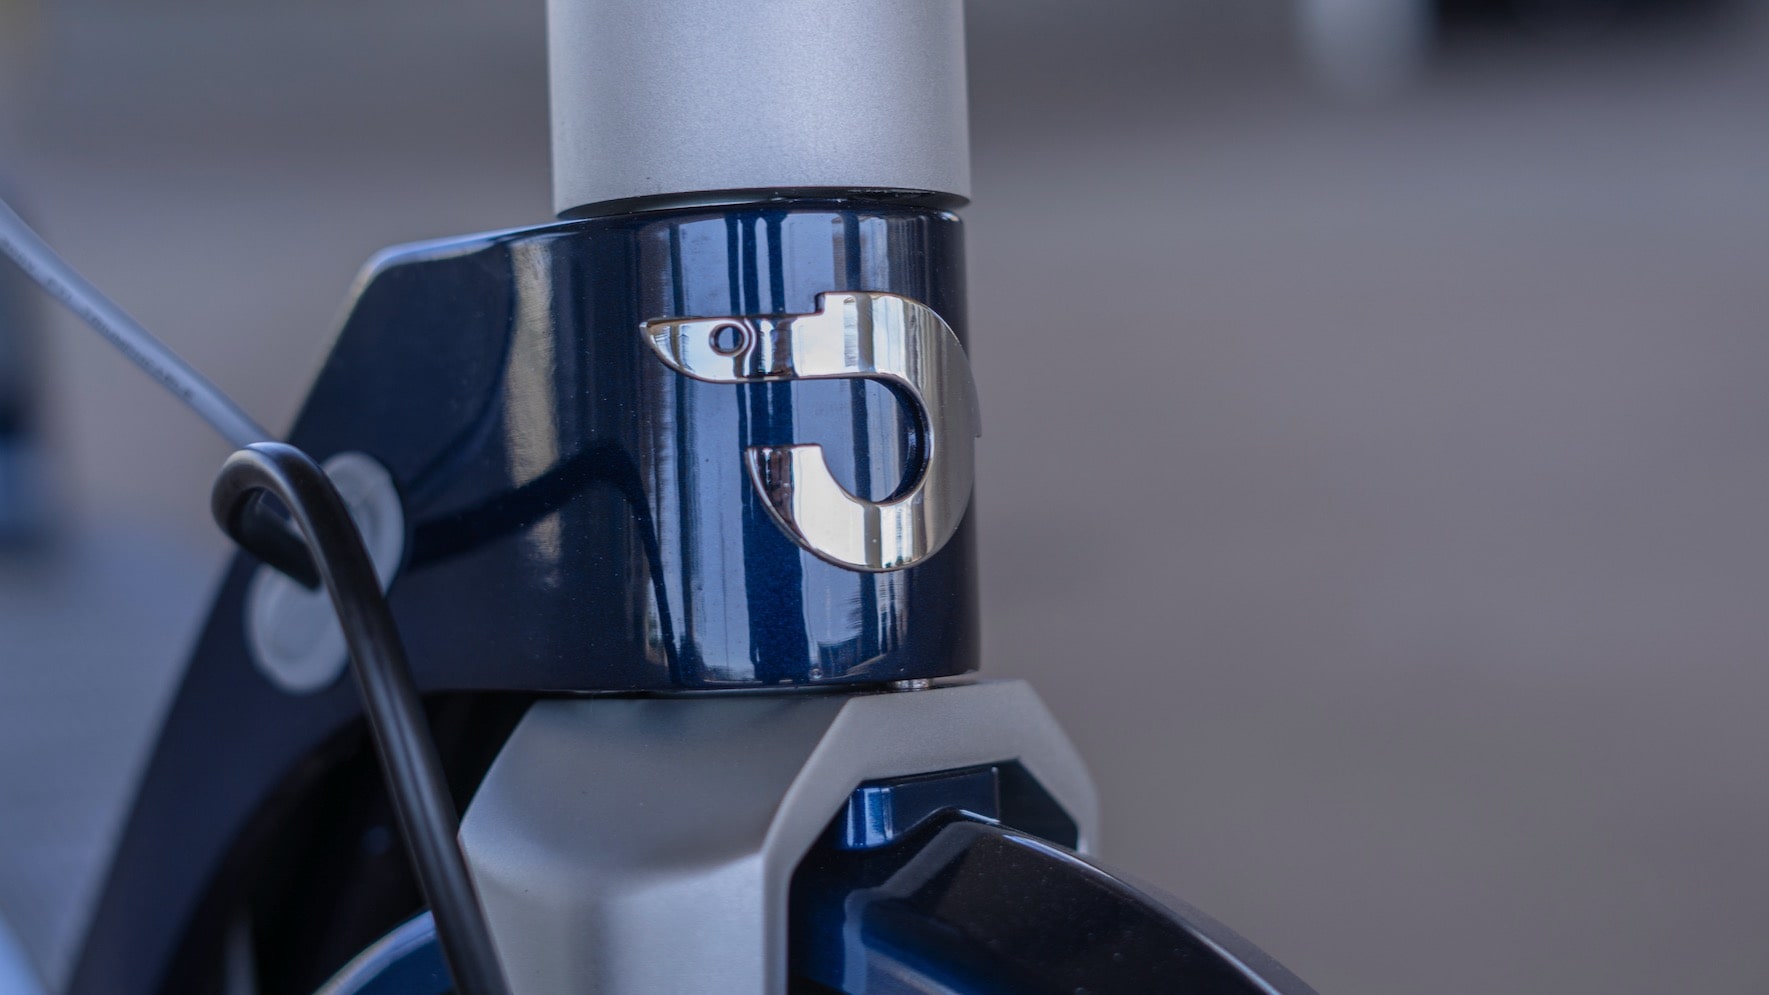 Unagi logo on the Model One electric scooter